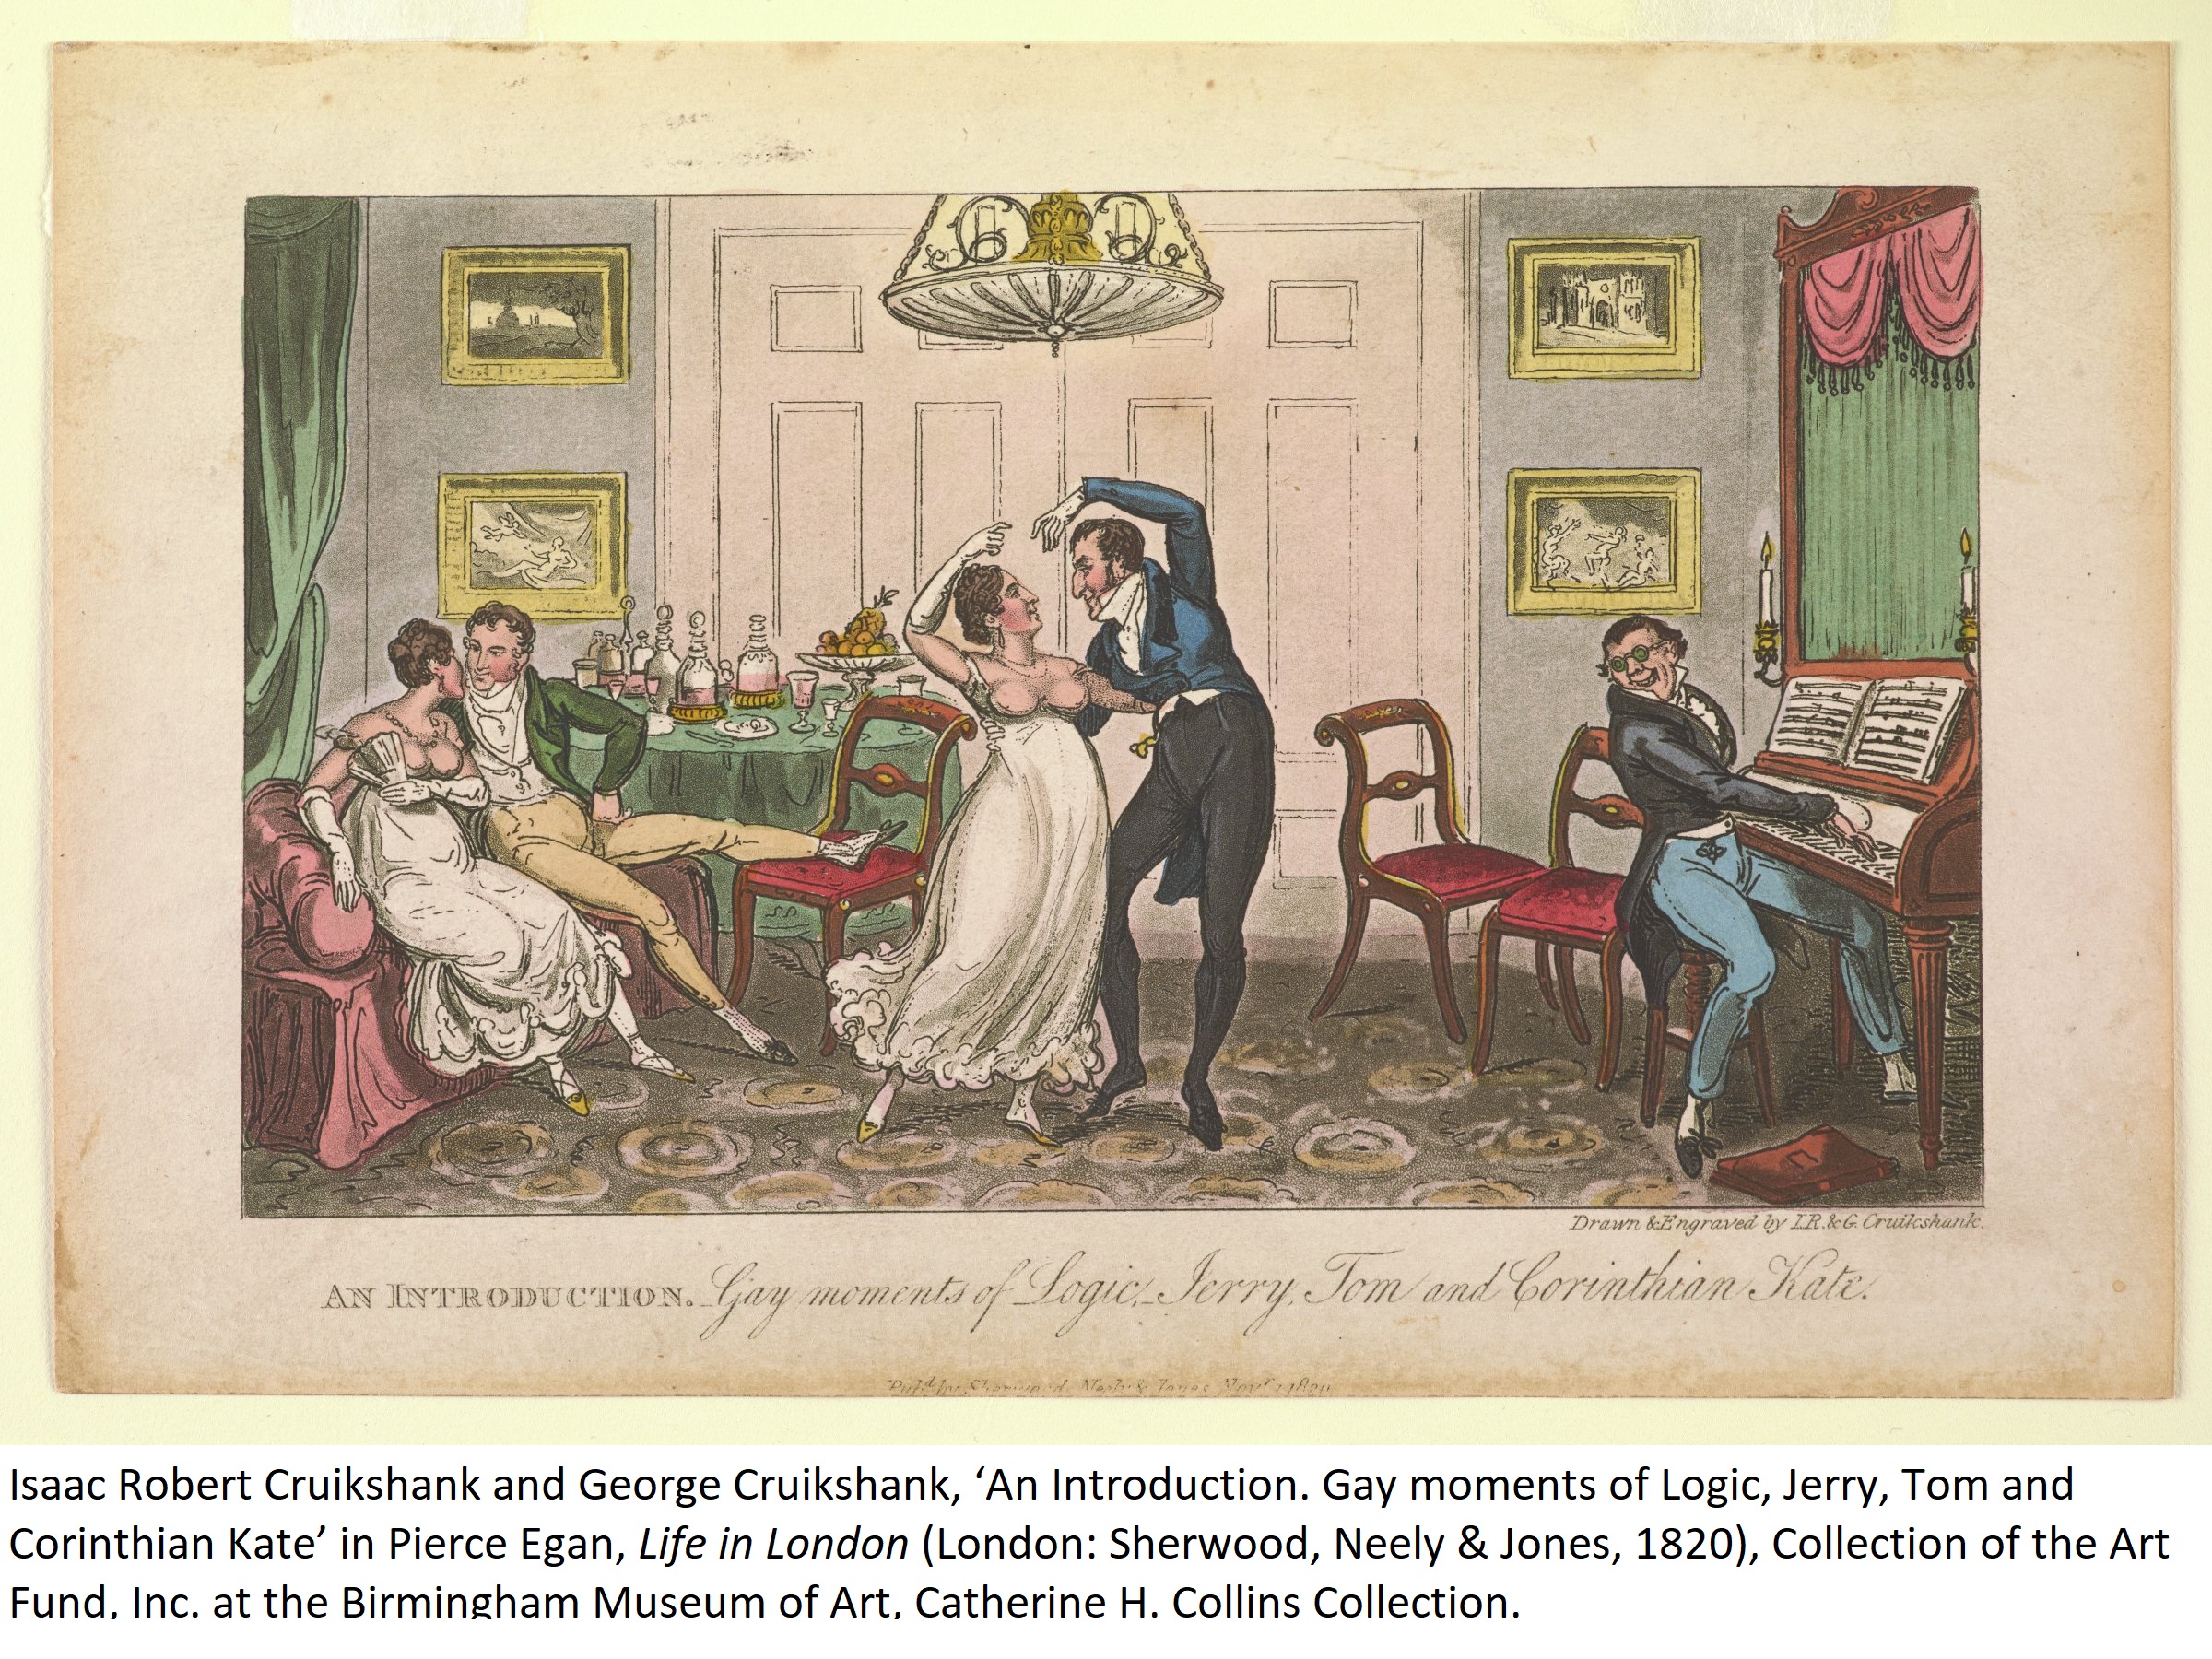 Isaac Robert Cruikshank and George Cruikshank, ‘An Introduction. Gay moments of Logic, Jerry, Tom and Corinthian Kate’ in Pierce Egan, Life in London (London: Sherwood, Neely & Jones, 1820), Collection of the Art Fund, Inc. at the Birmingham Museum of Art, Catherine H. Collins Collection.